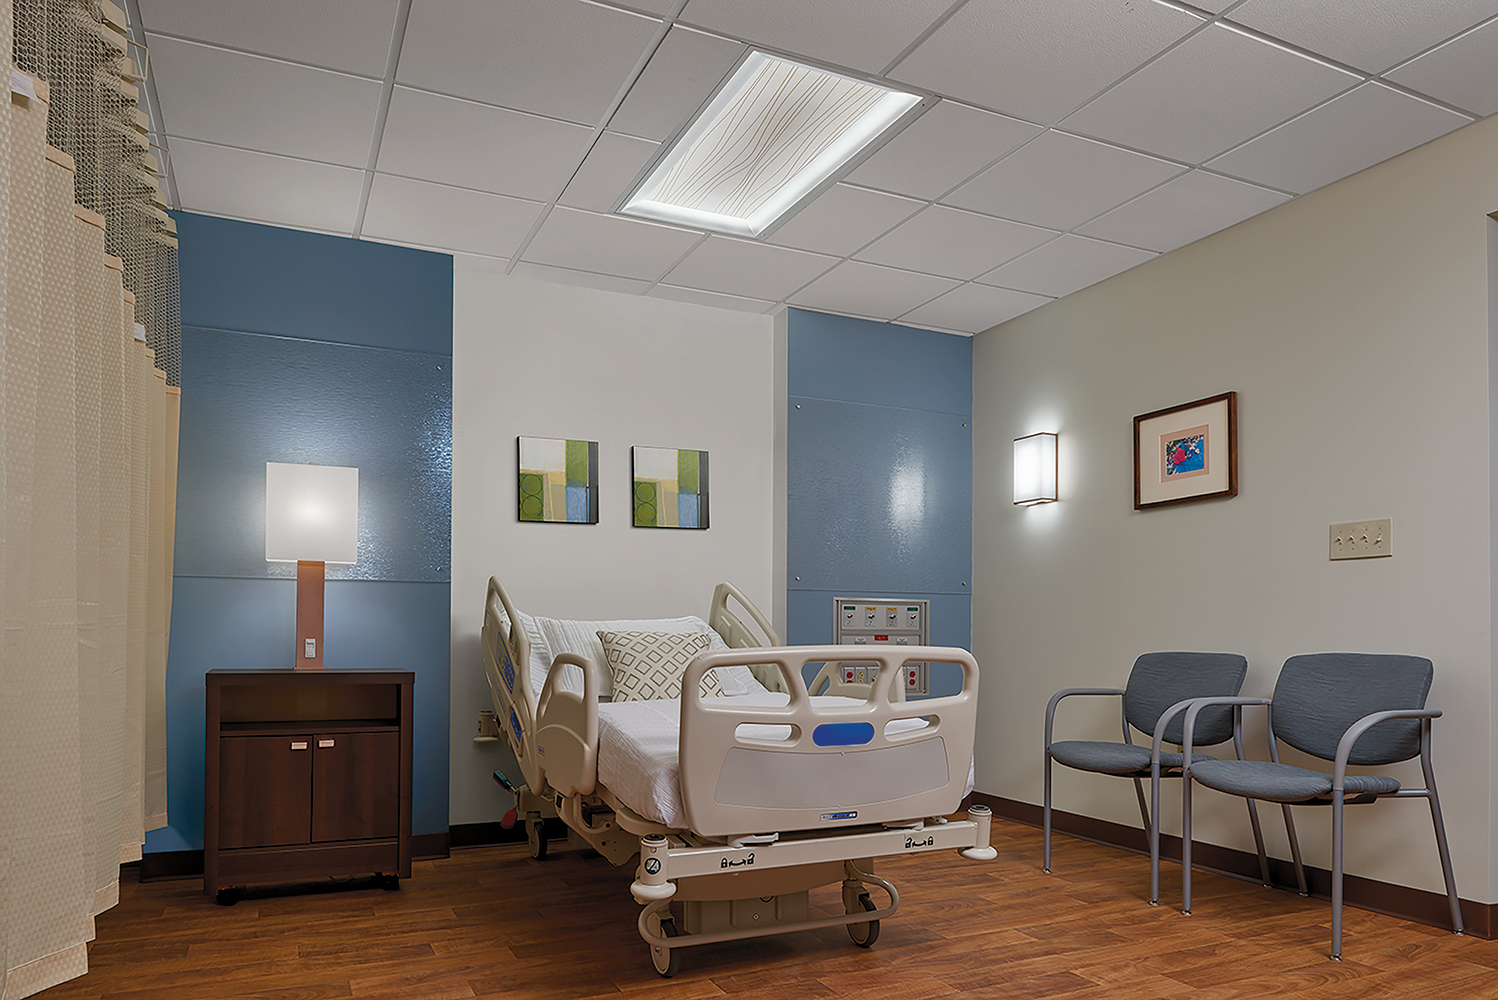 Serenity patient room lighting fixtures illuminate a hospital bed from a table lamp, overbed luminaire, and wall sconce.